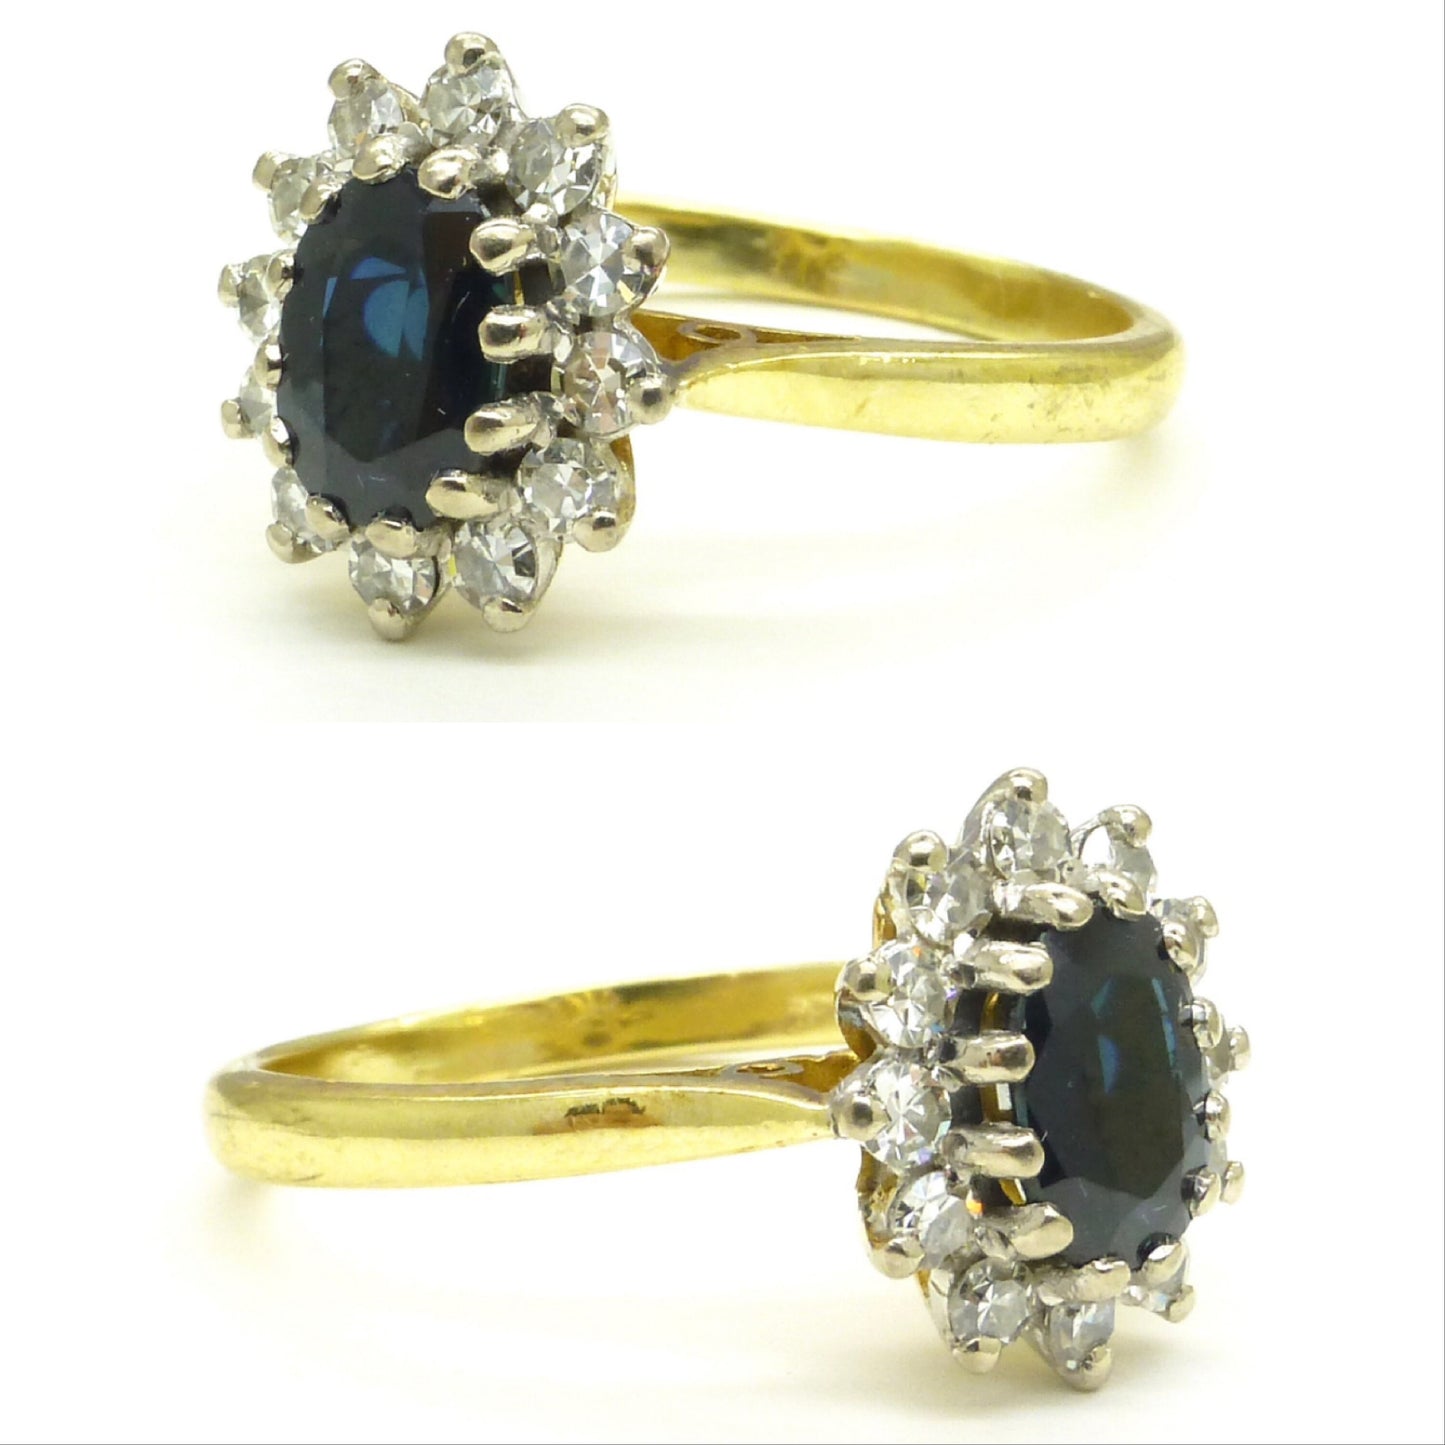 Vintage 18ct gold Sapphire & Diamond oval cluster engagement ring - Princess of Wales ring